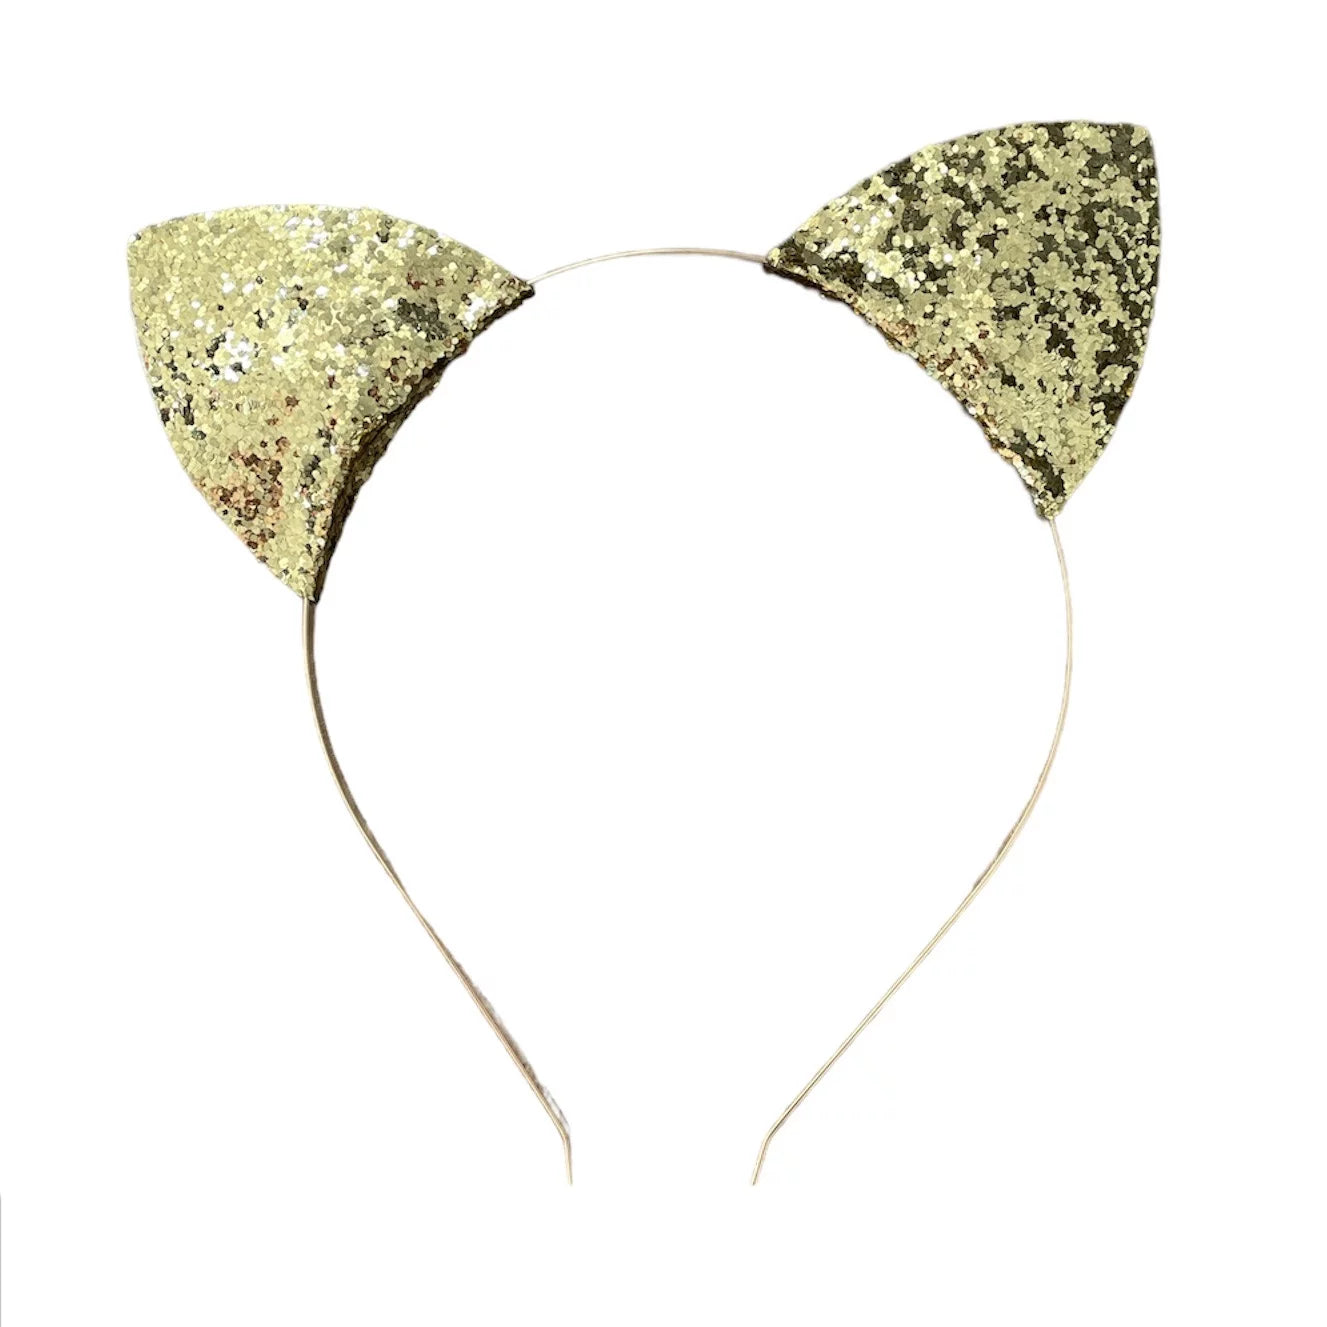 The Cat Head Band Gold